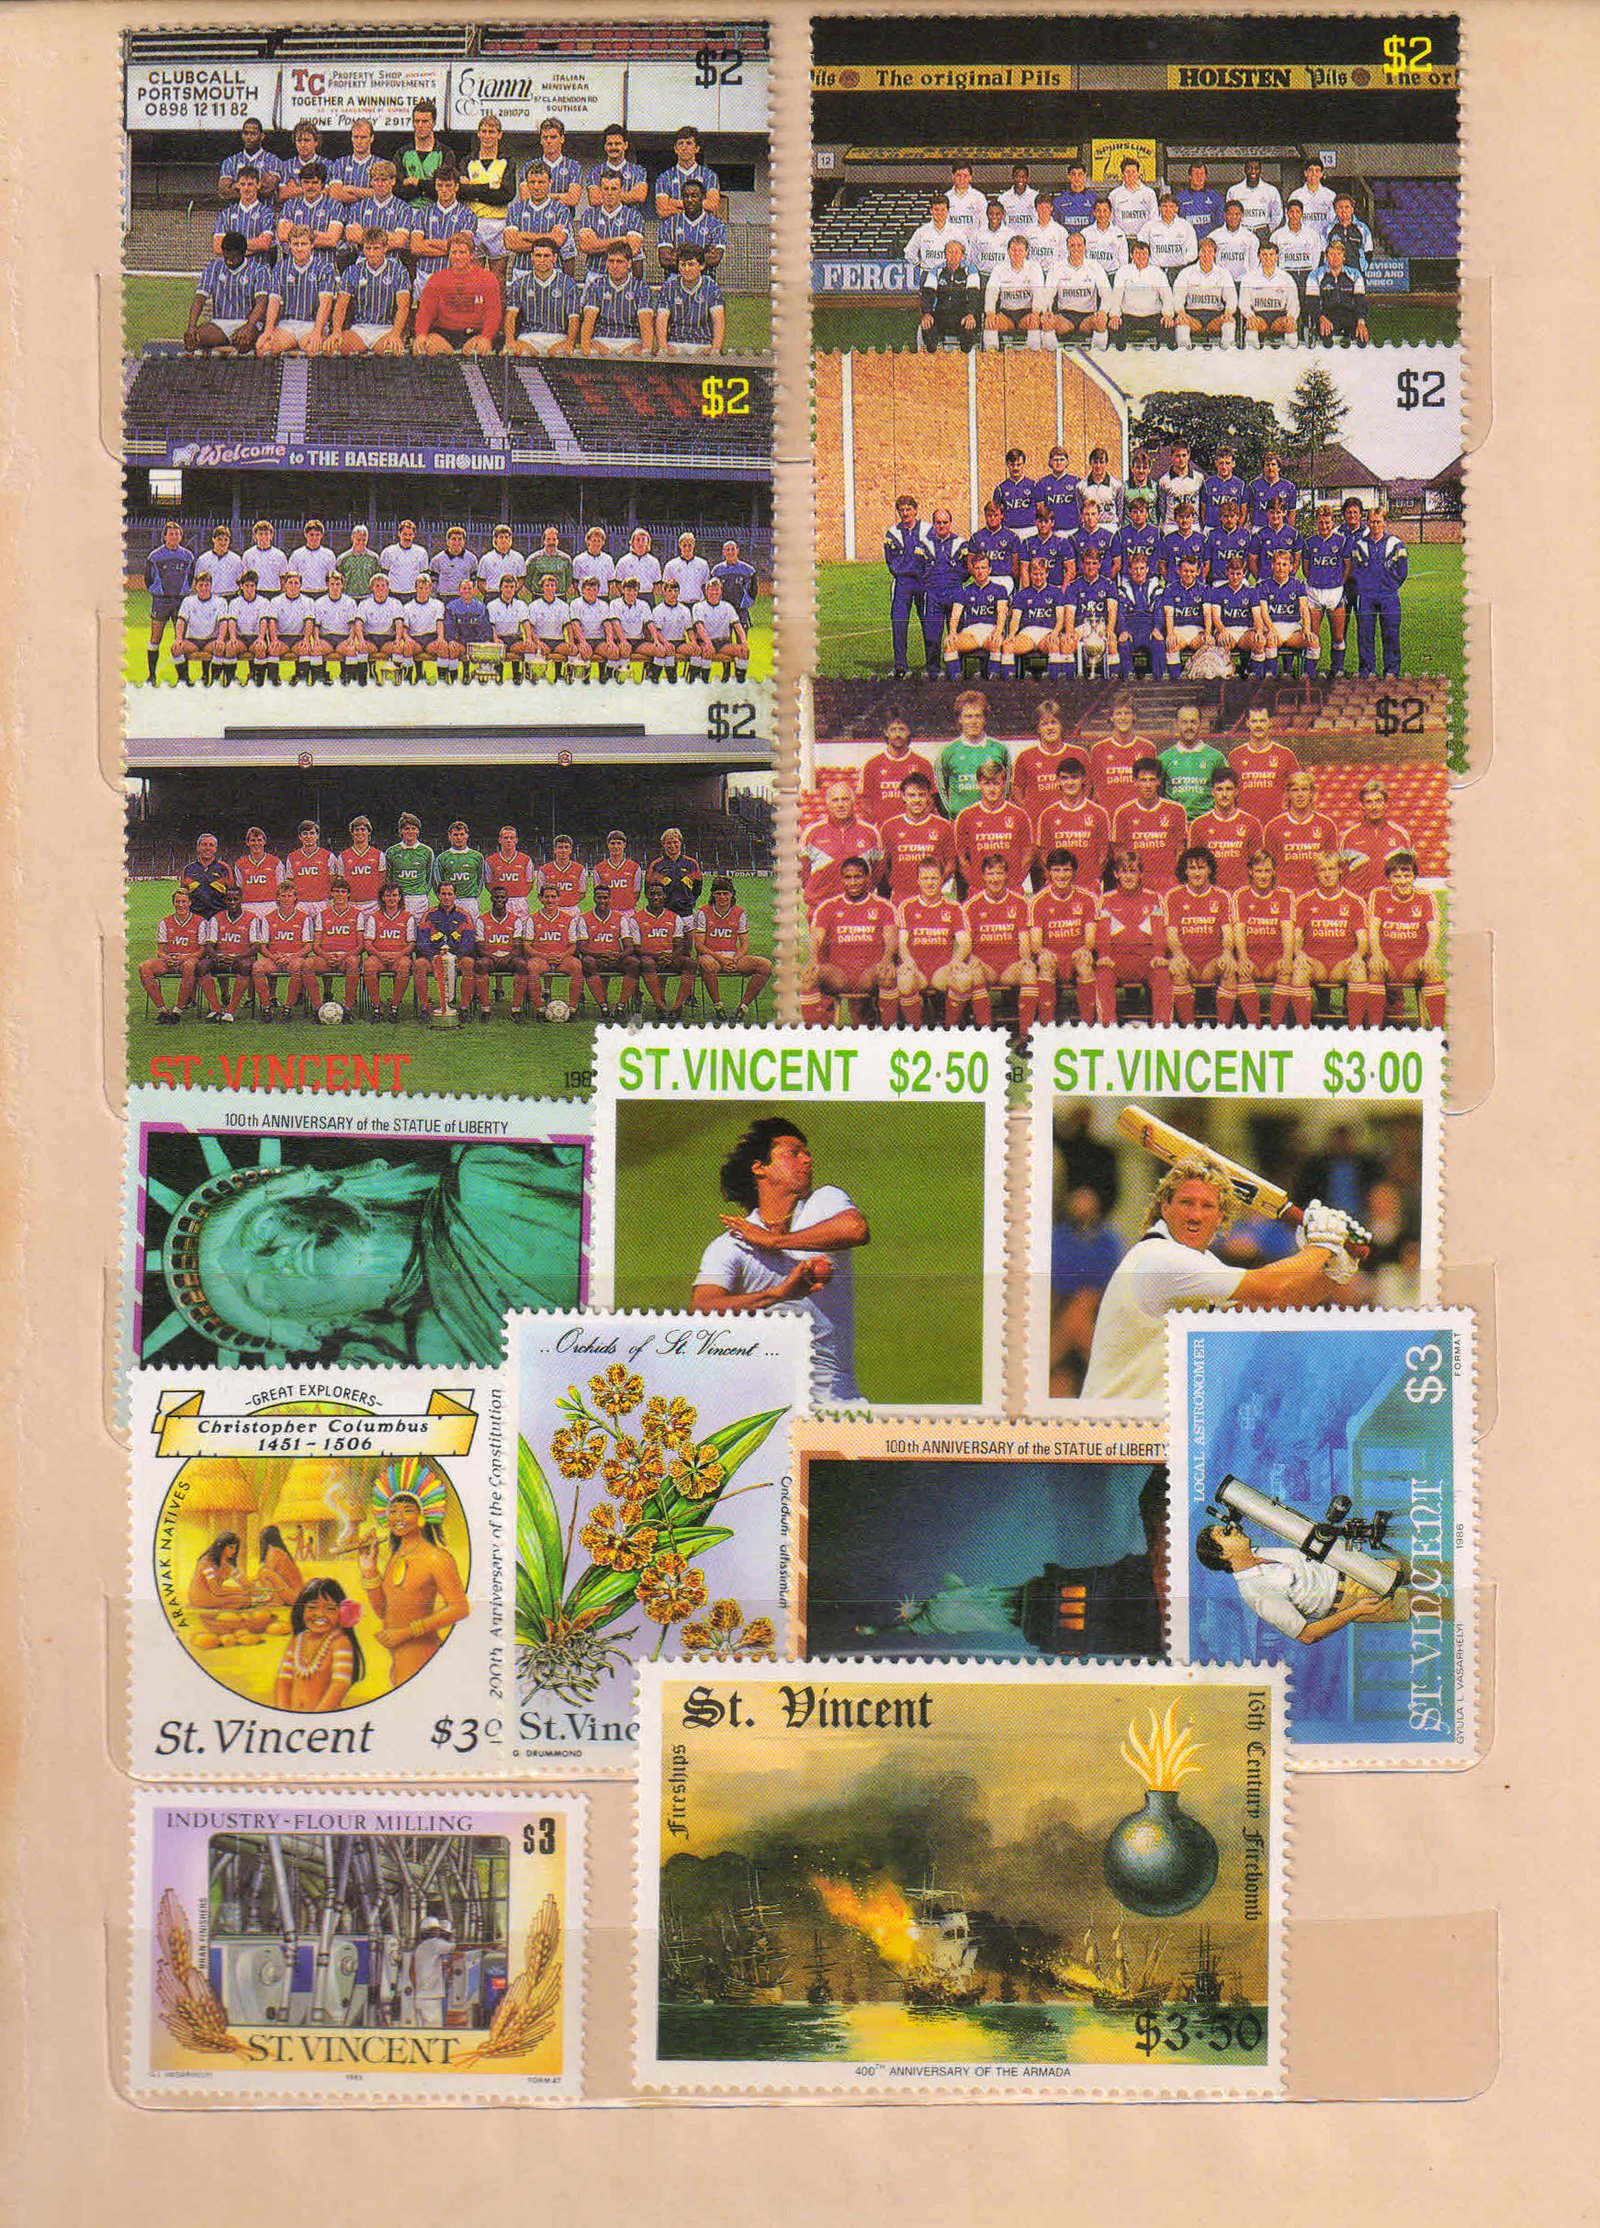 ST. VINCENT Mint Thematic Stamps-170 All Different-Football, Sports, Locomotive, Birds, Cars etc.